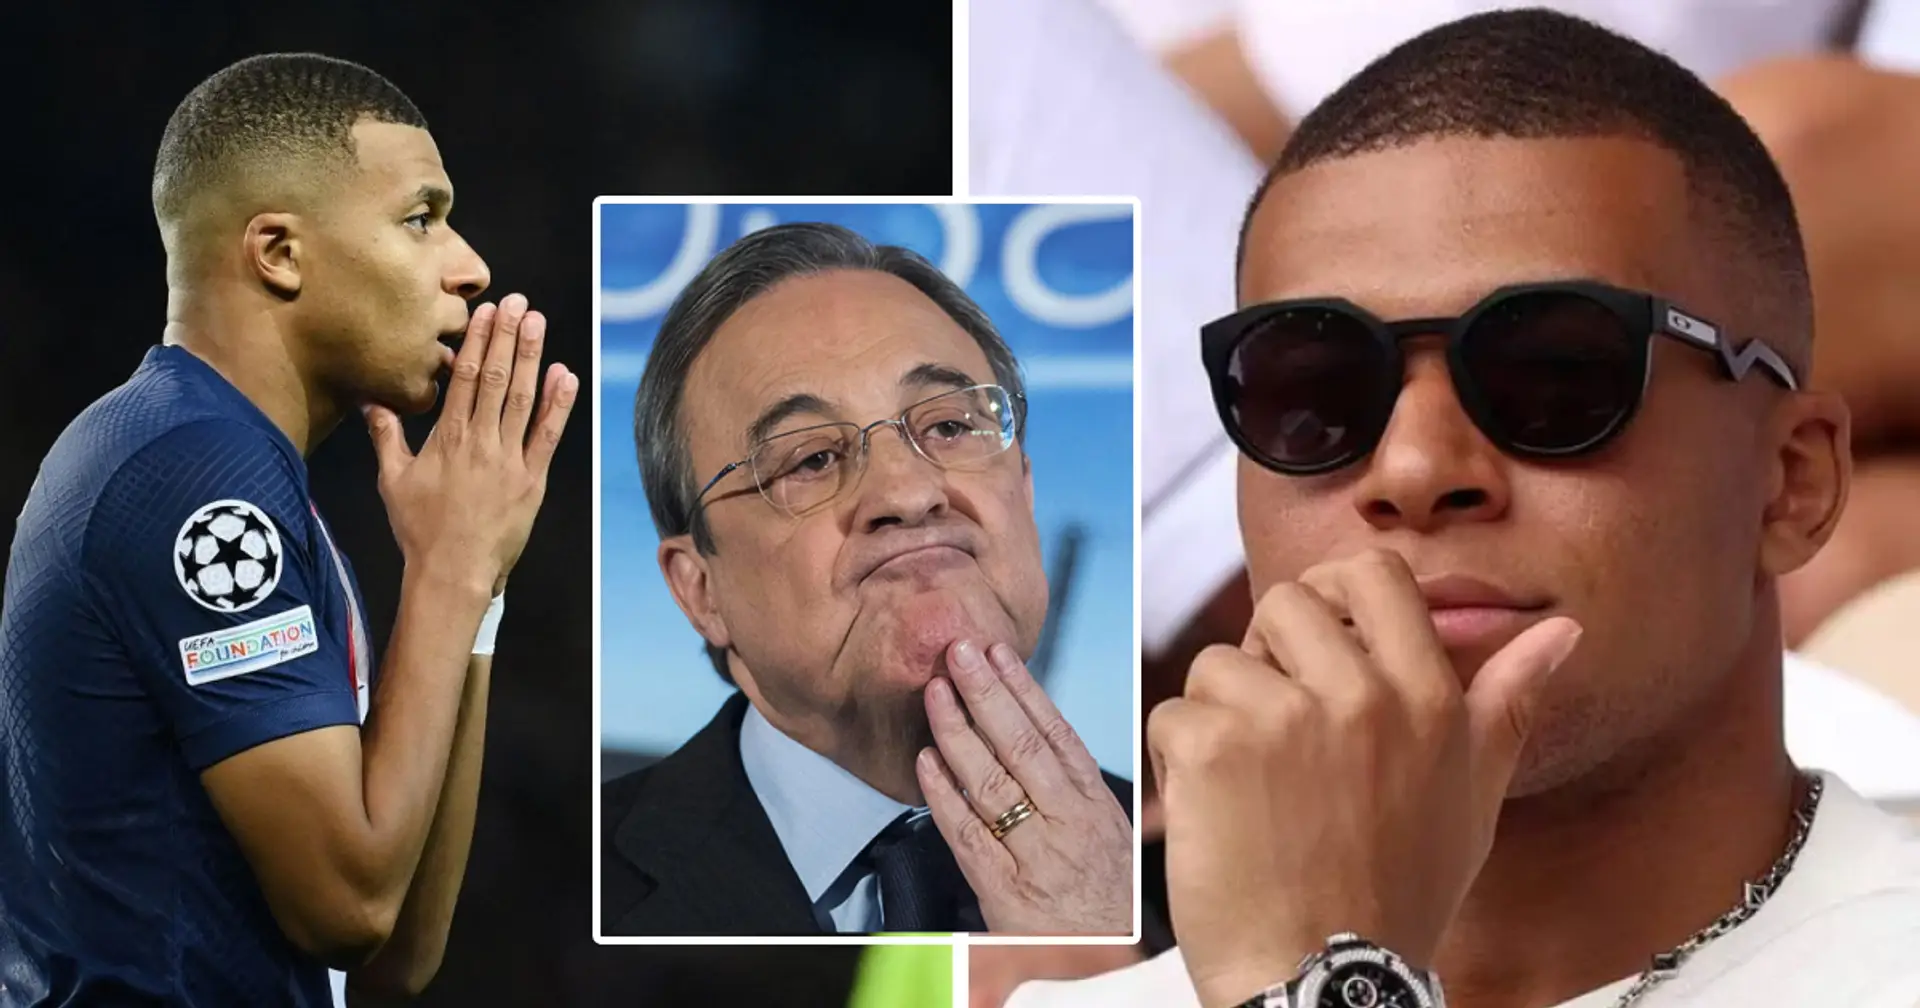 Kylian Mbappe informed PSG that he will not extend his contract